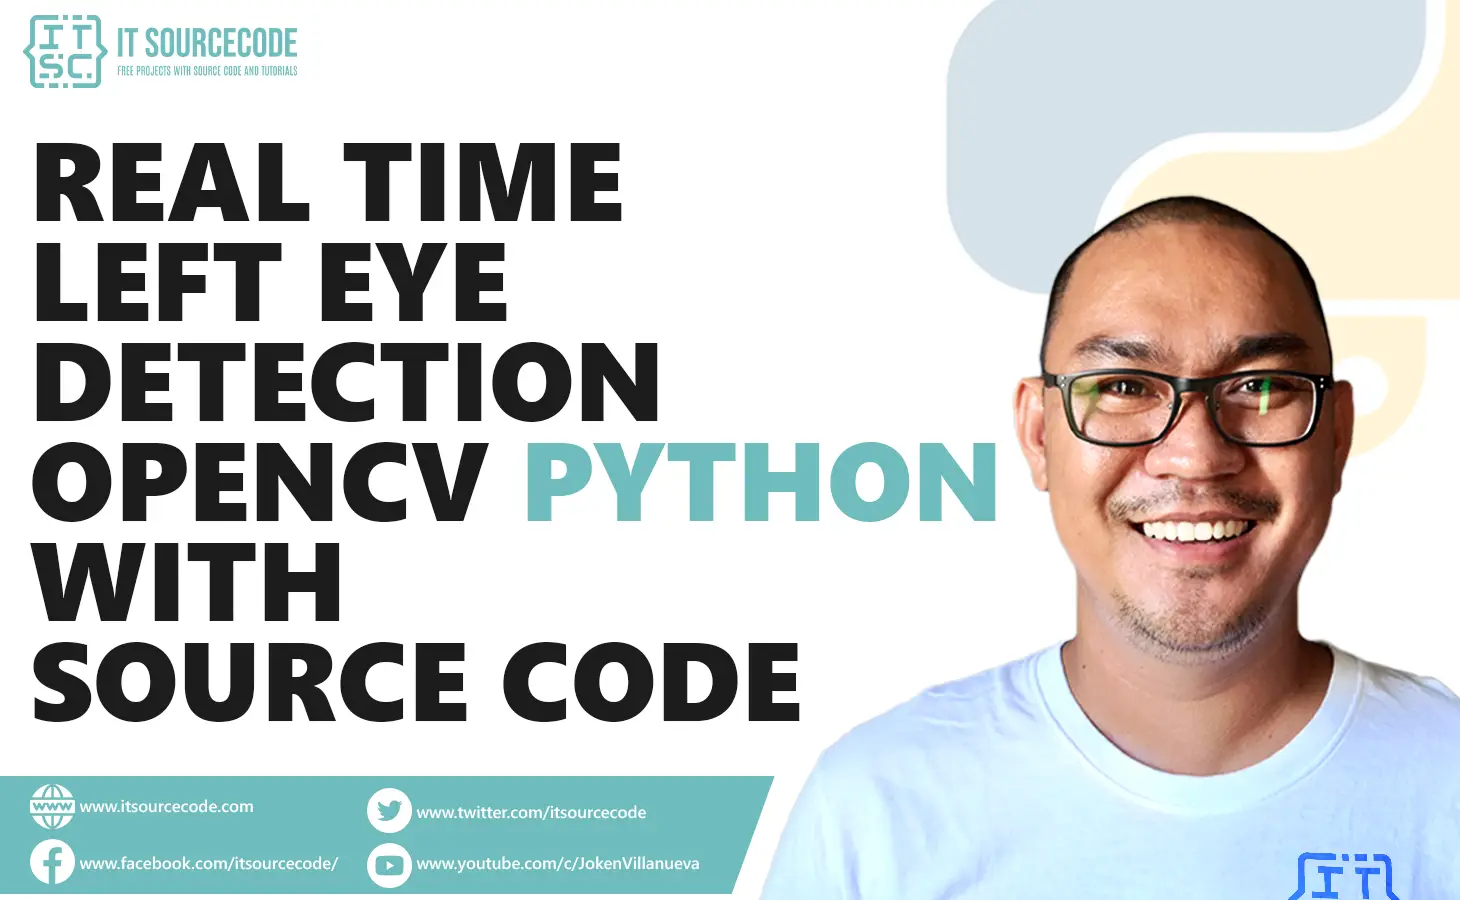 Real-Time Left Eye Detection OpenCV Python With Source Code